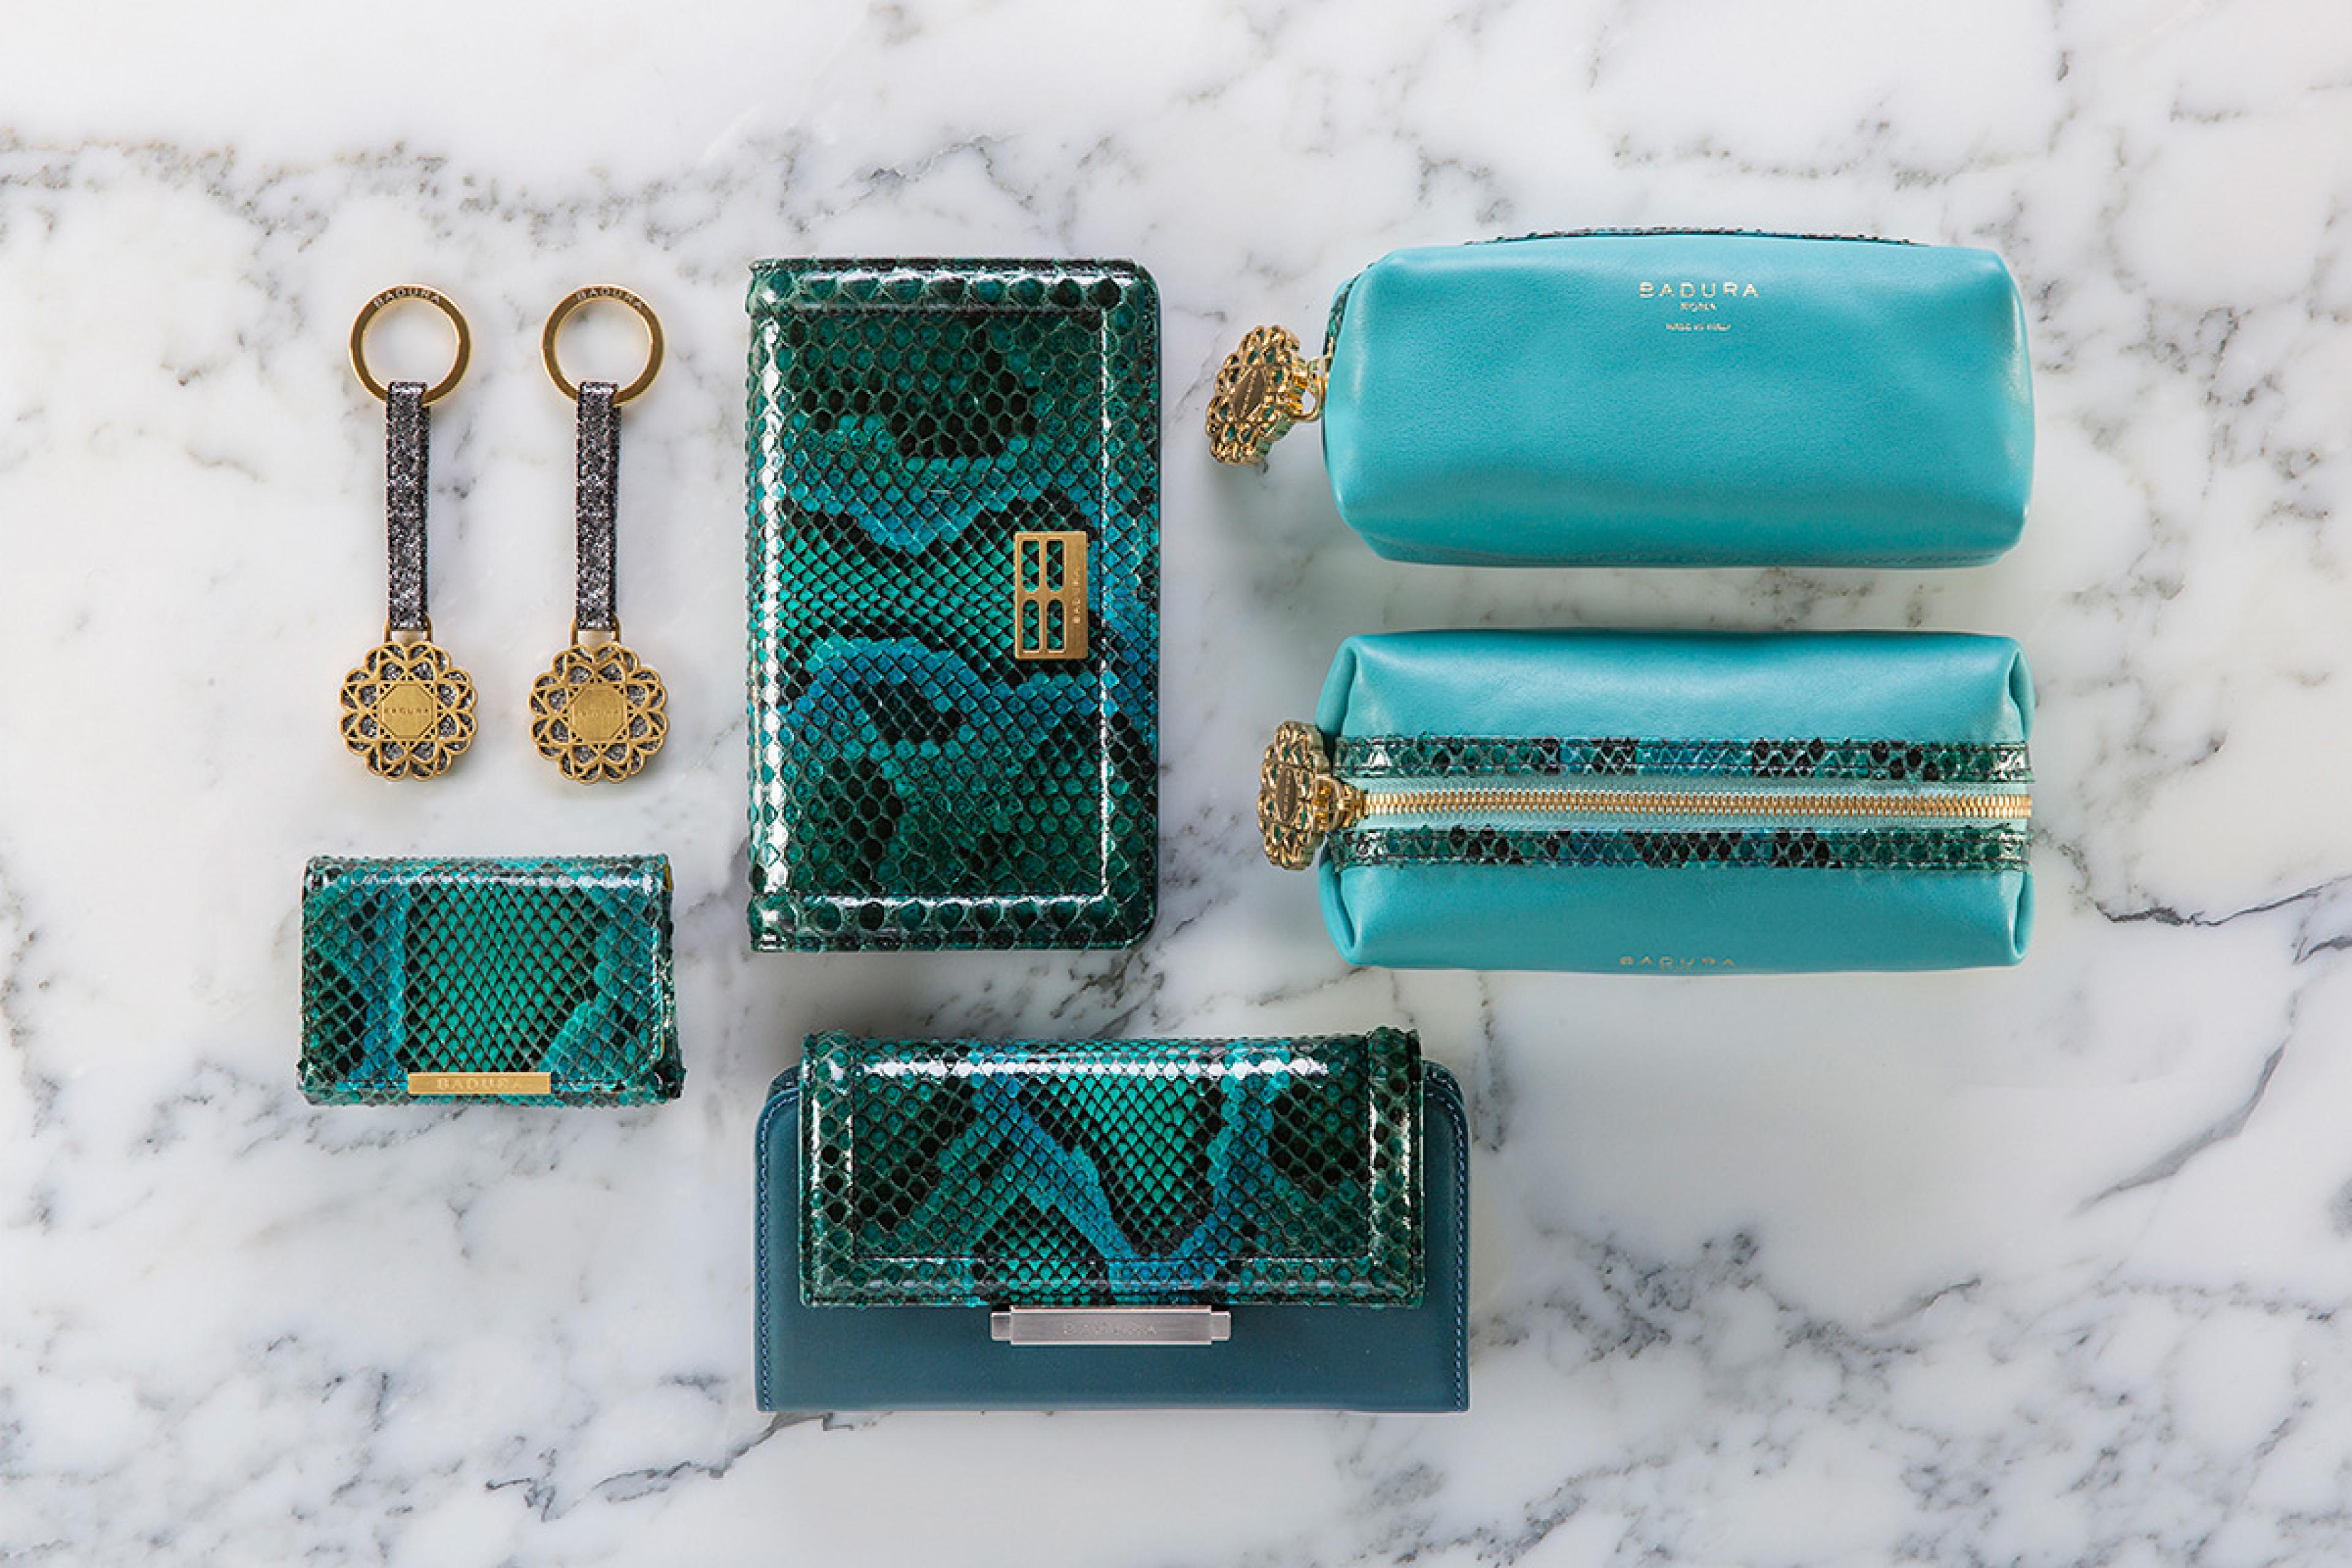 an overhead view of teal leather bags and clutches